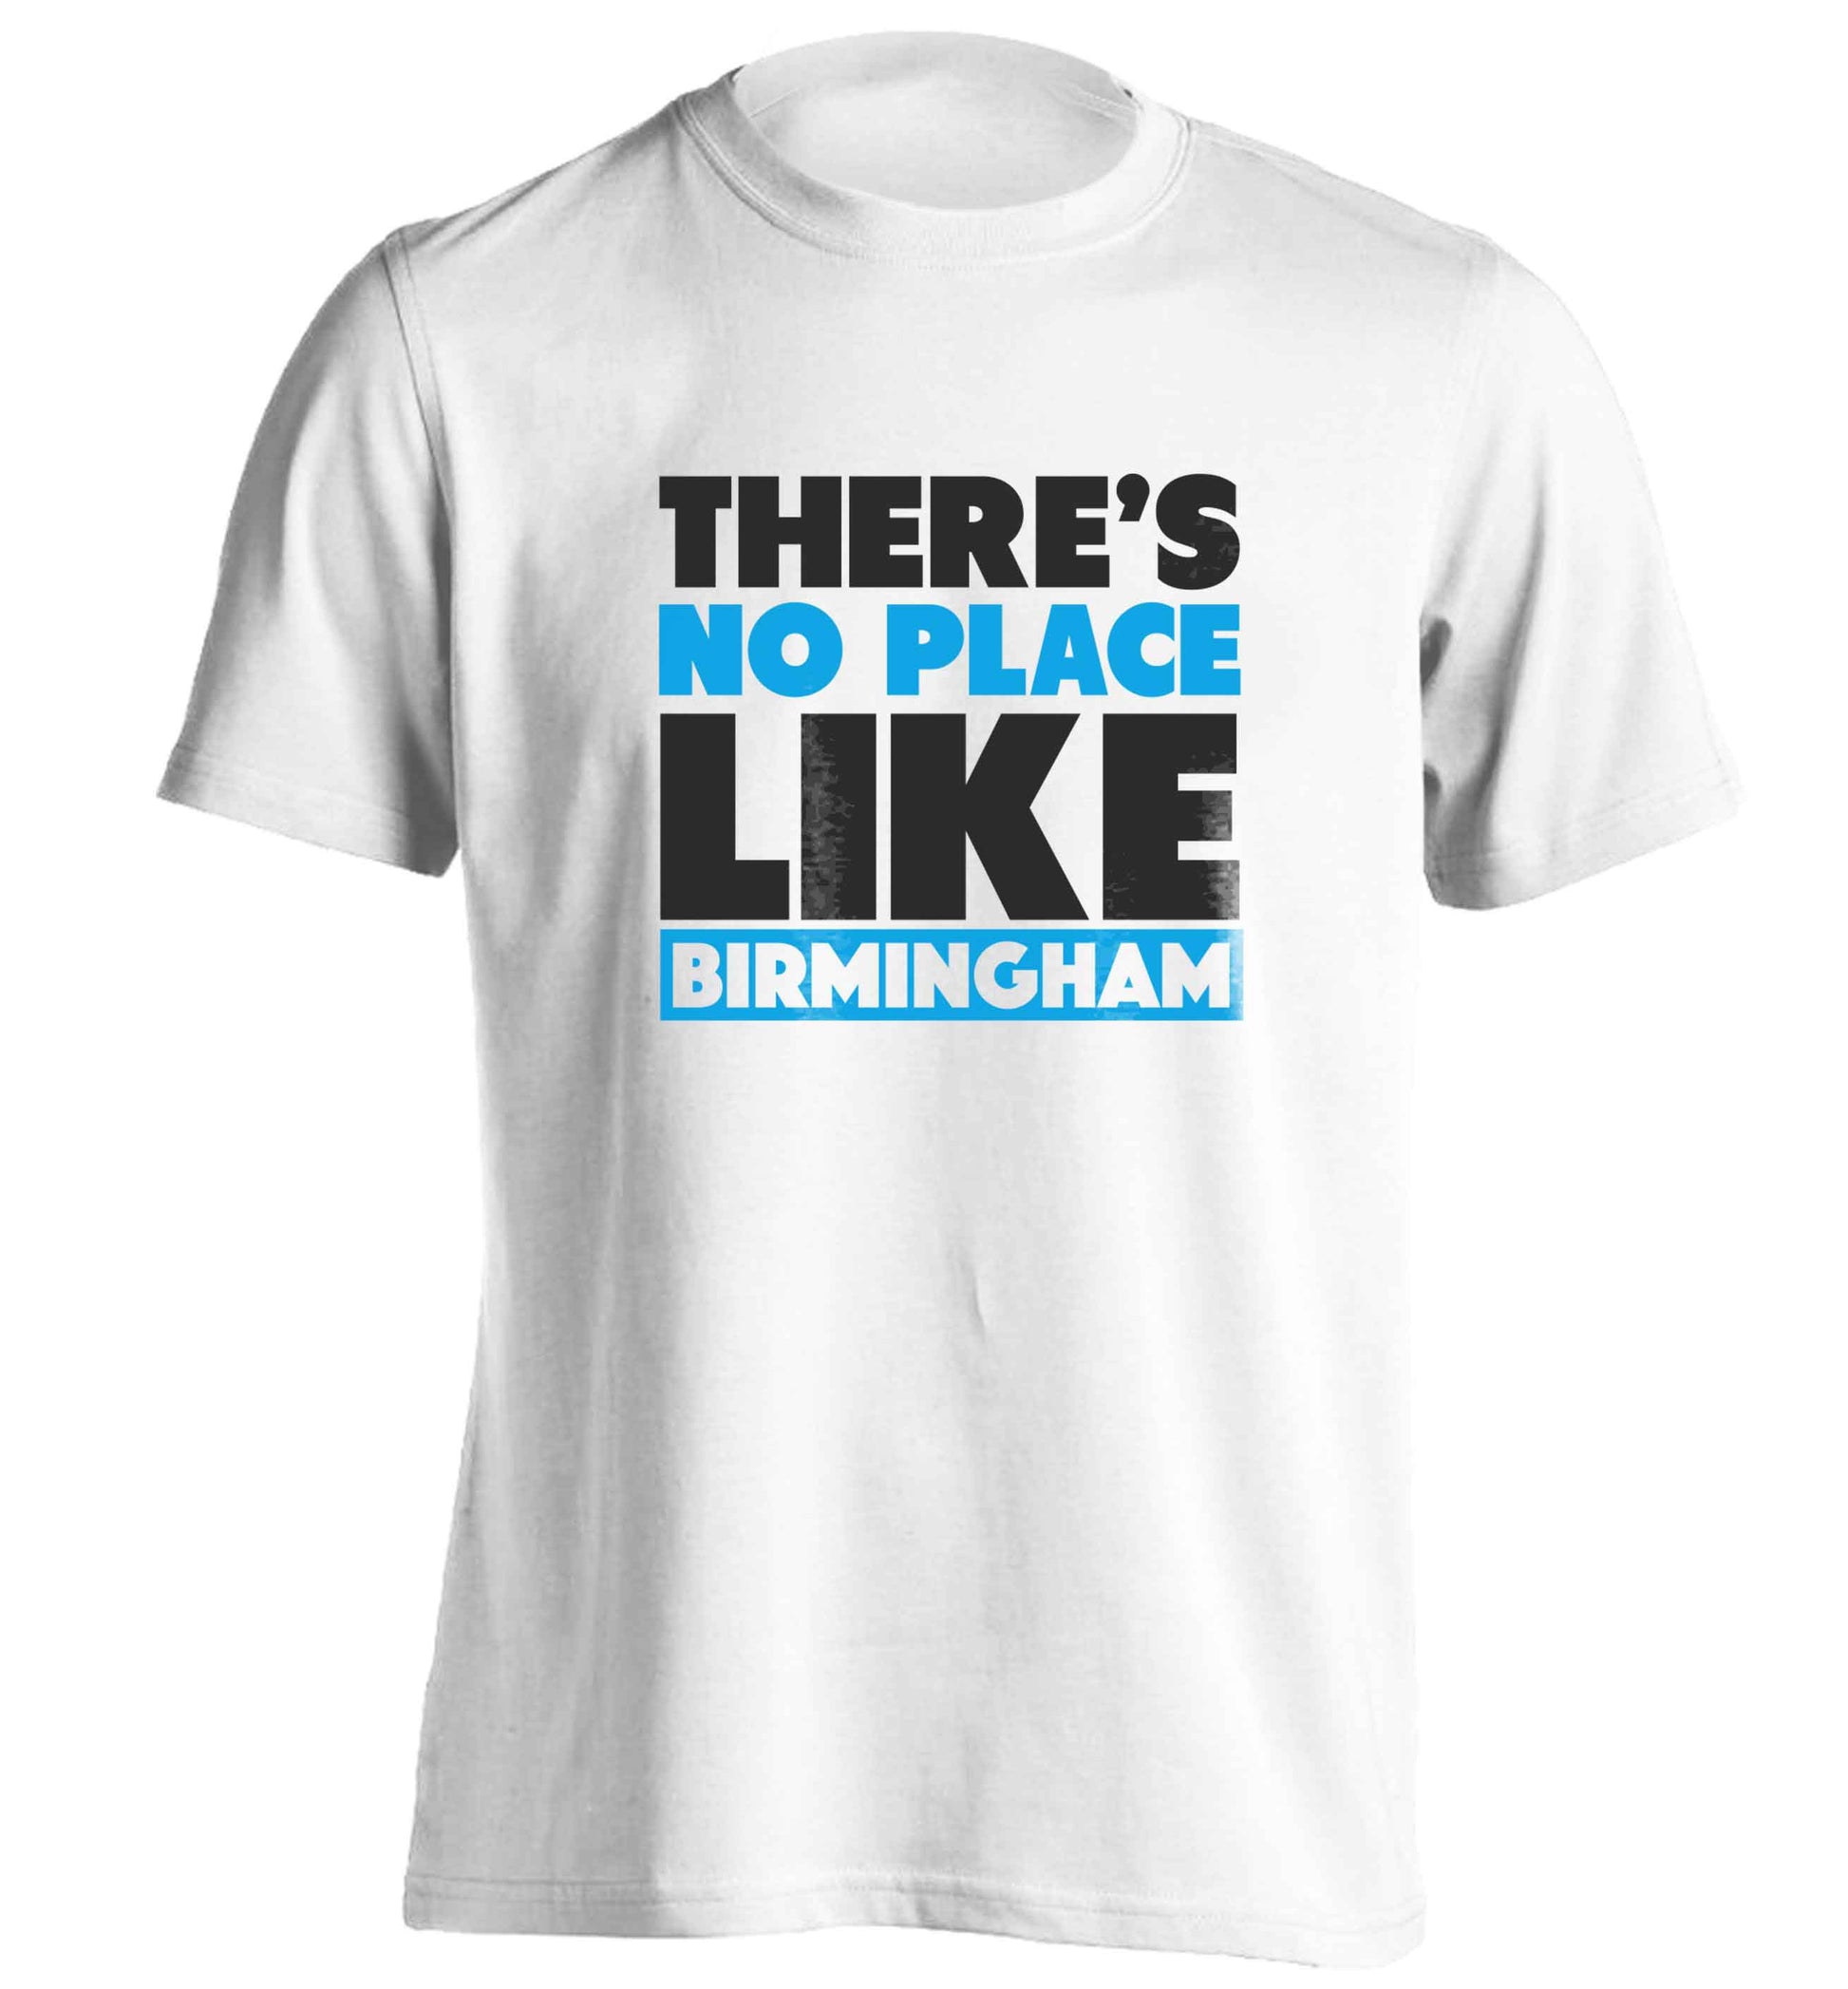 There's no place like Birmingham adults unisex white Tshirt 2XL